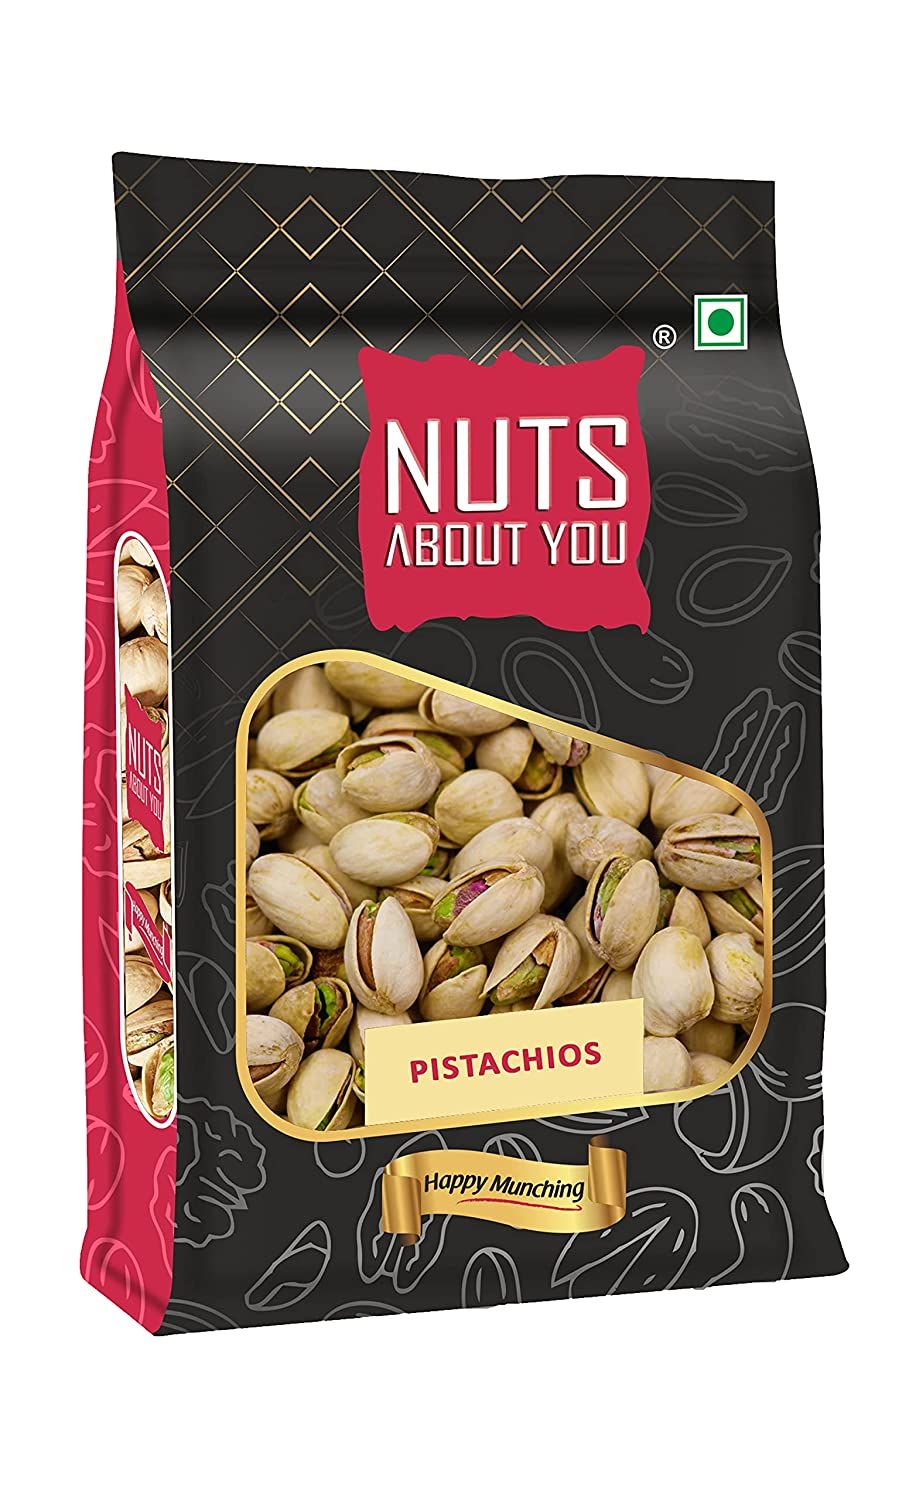 Nuts About You Pistachios Image